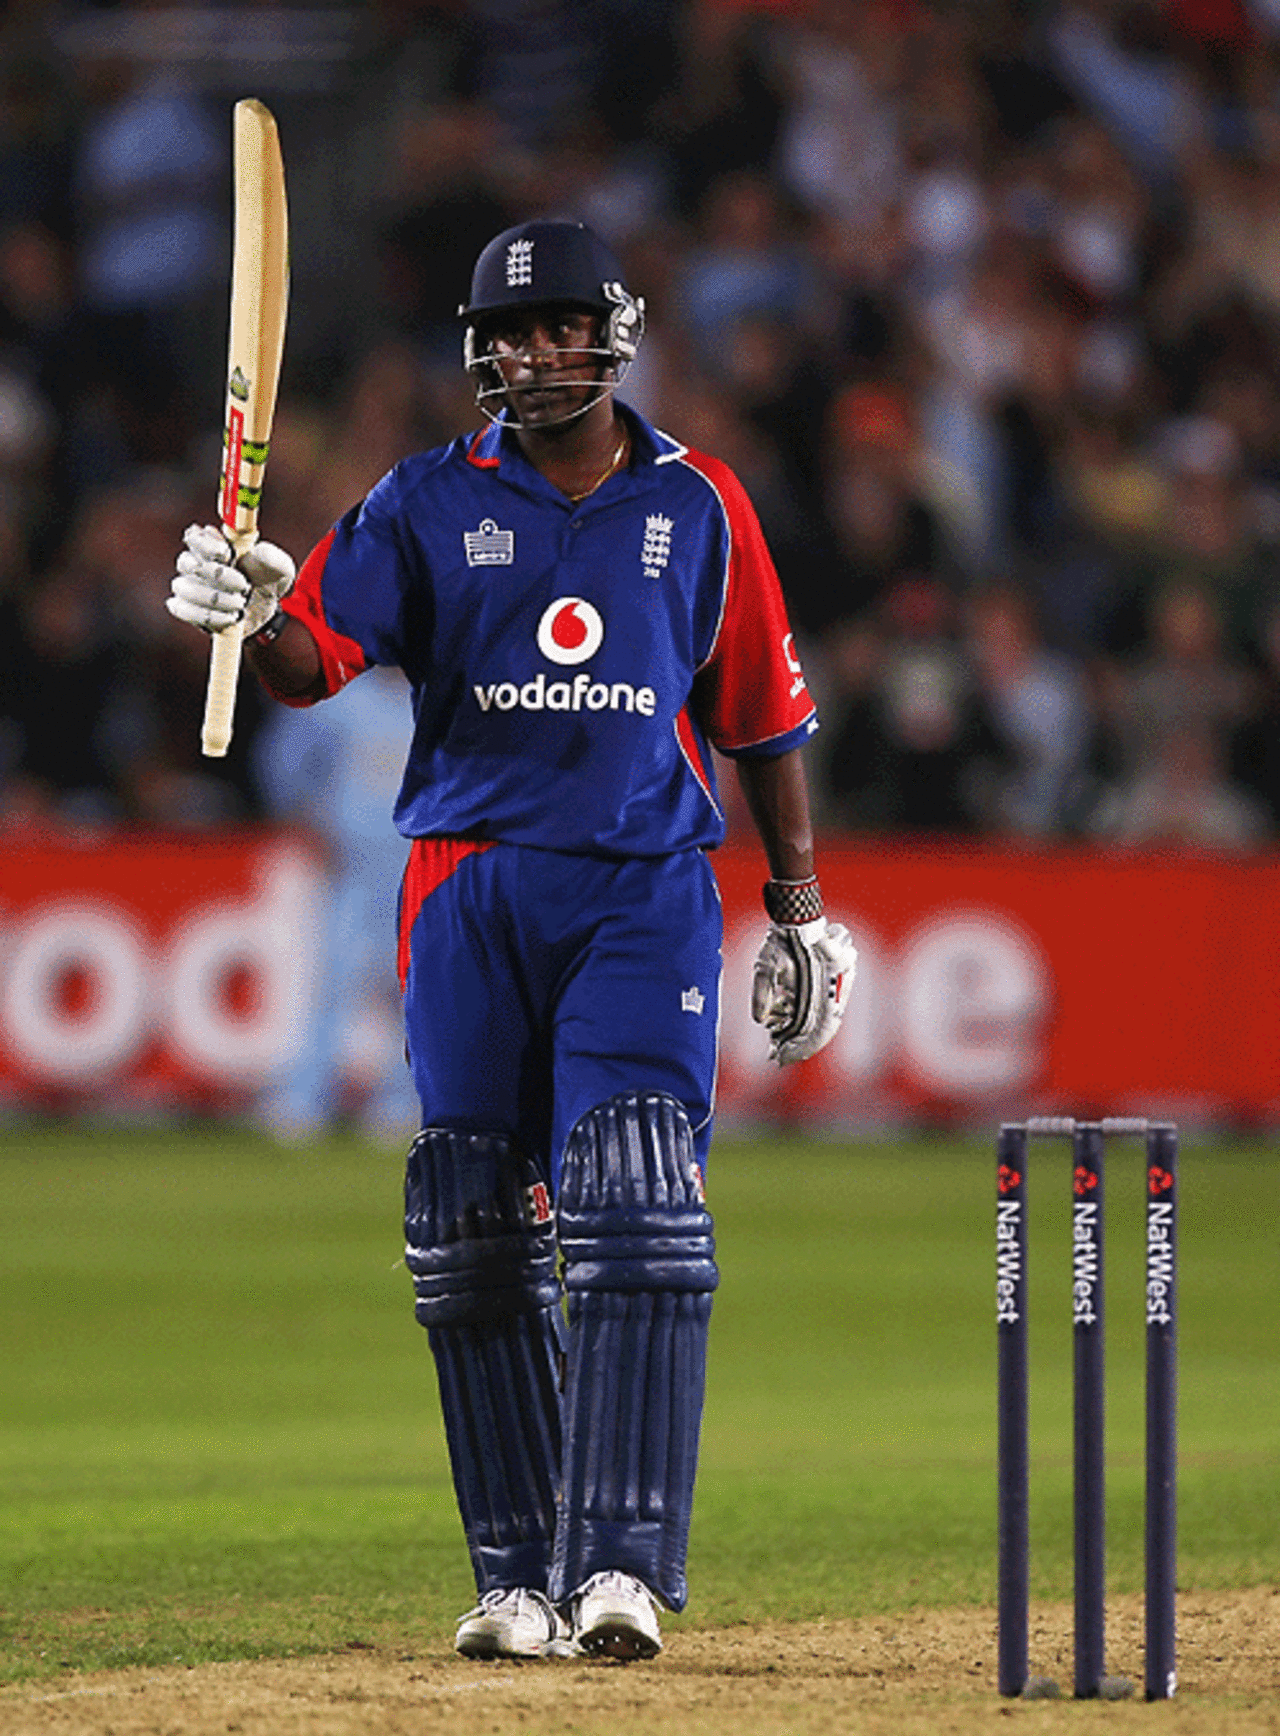 Dimitri Mascarenhas reached his fifty off 36 balls, England v India, 2nd ODI, Bristol, August 24, 2007